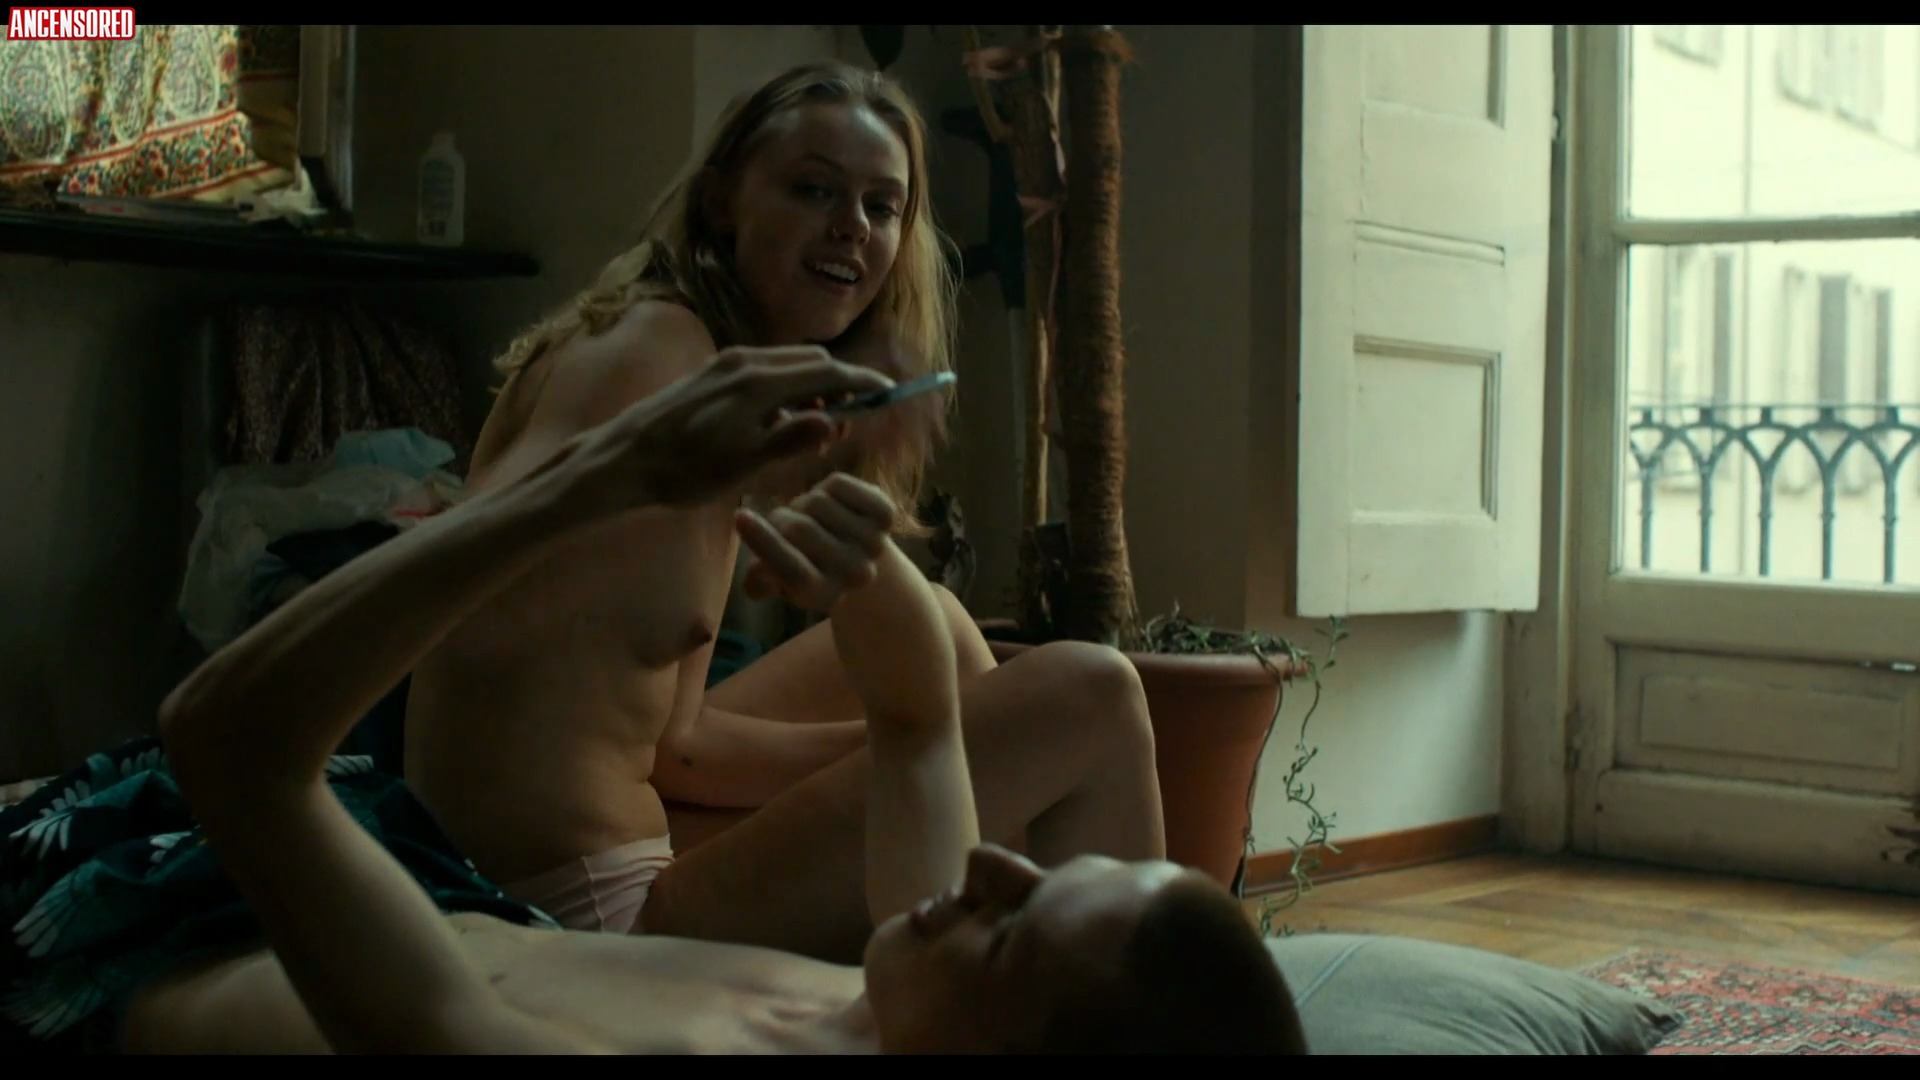 Naked Frida Gustavsson in Tigers < ANCENSORED